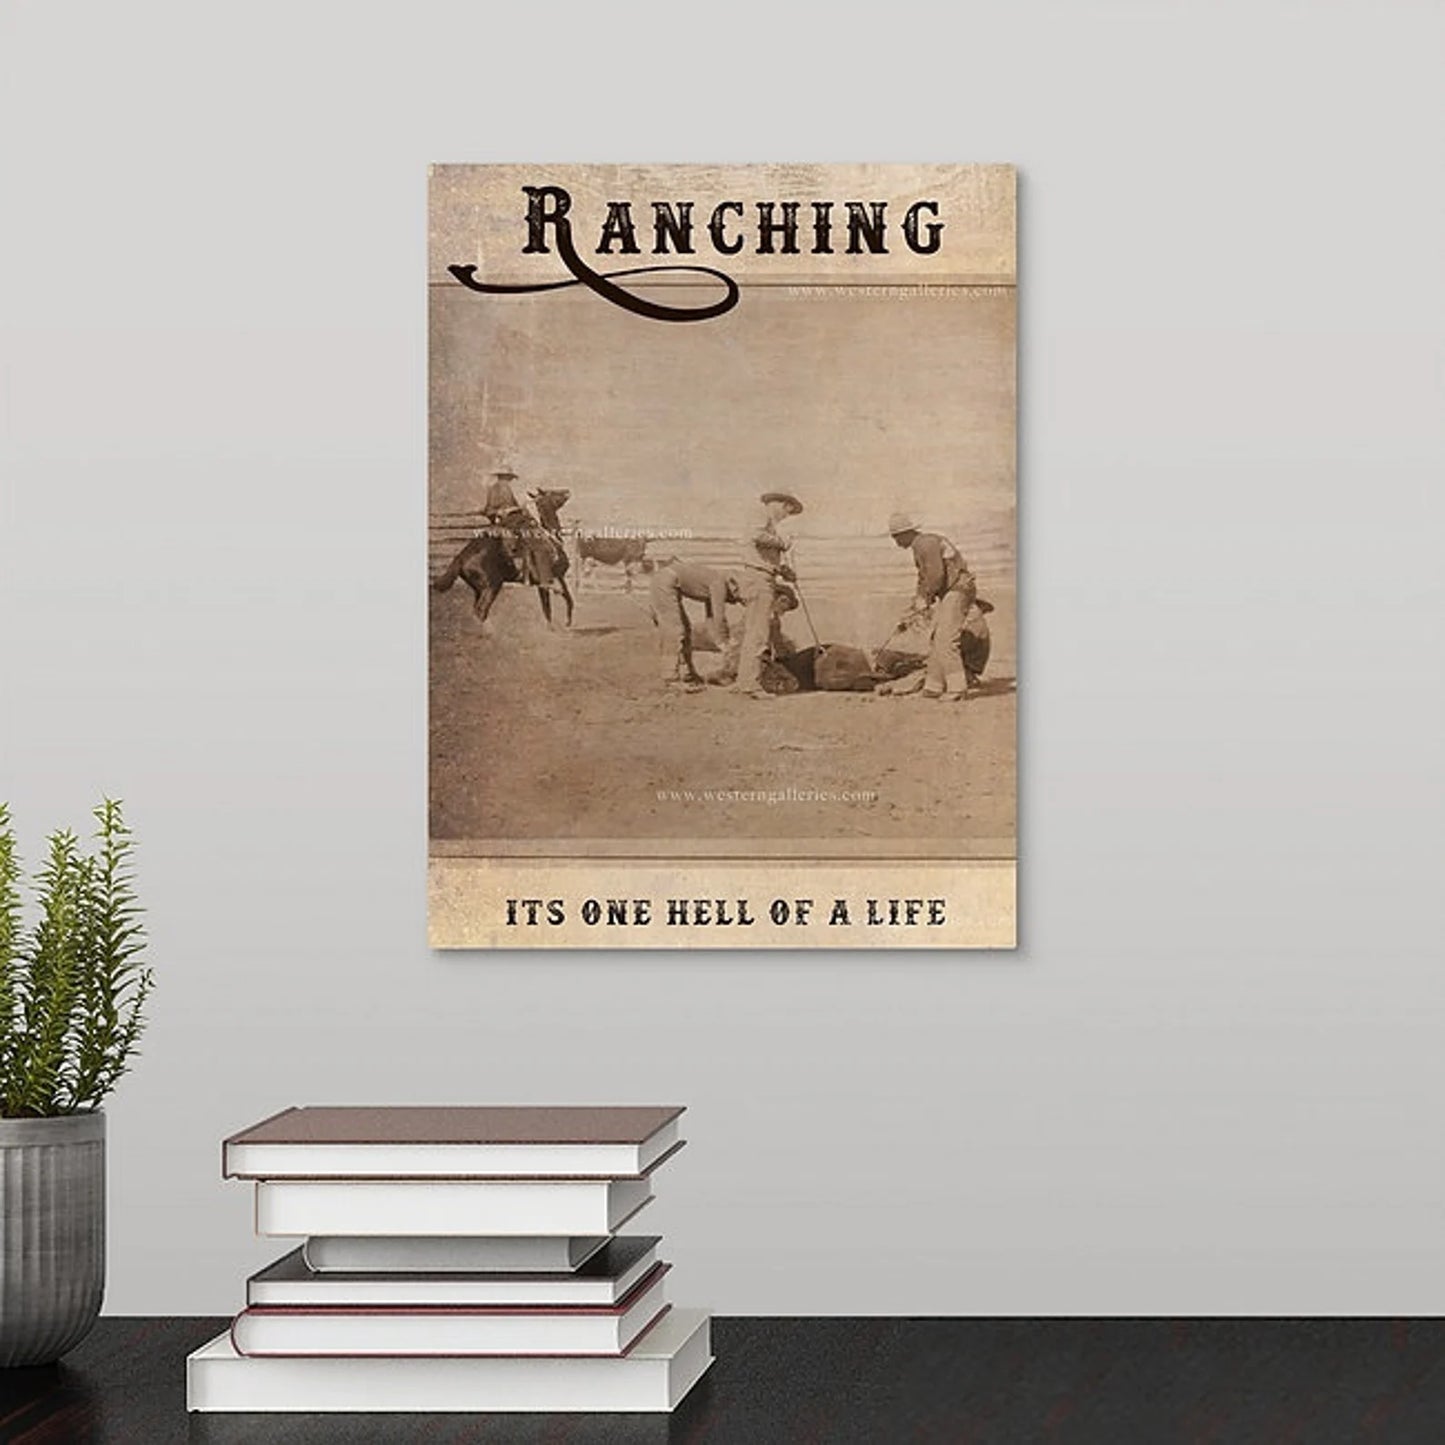 Ranching Its One Hell of a Life - Cards, Canvas, Prints, Decor